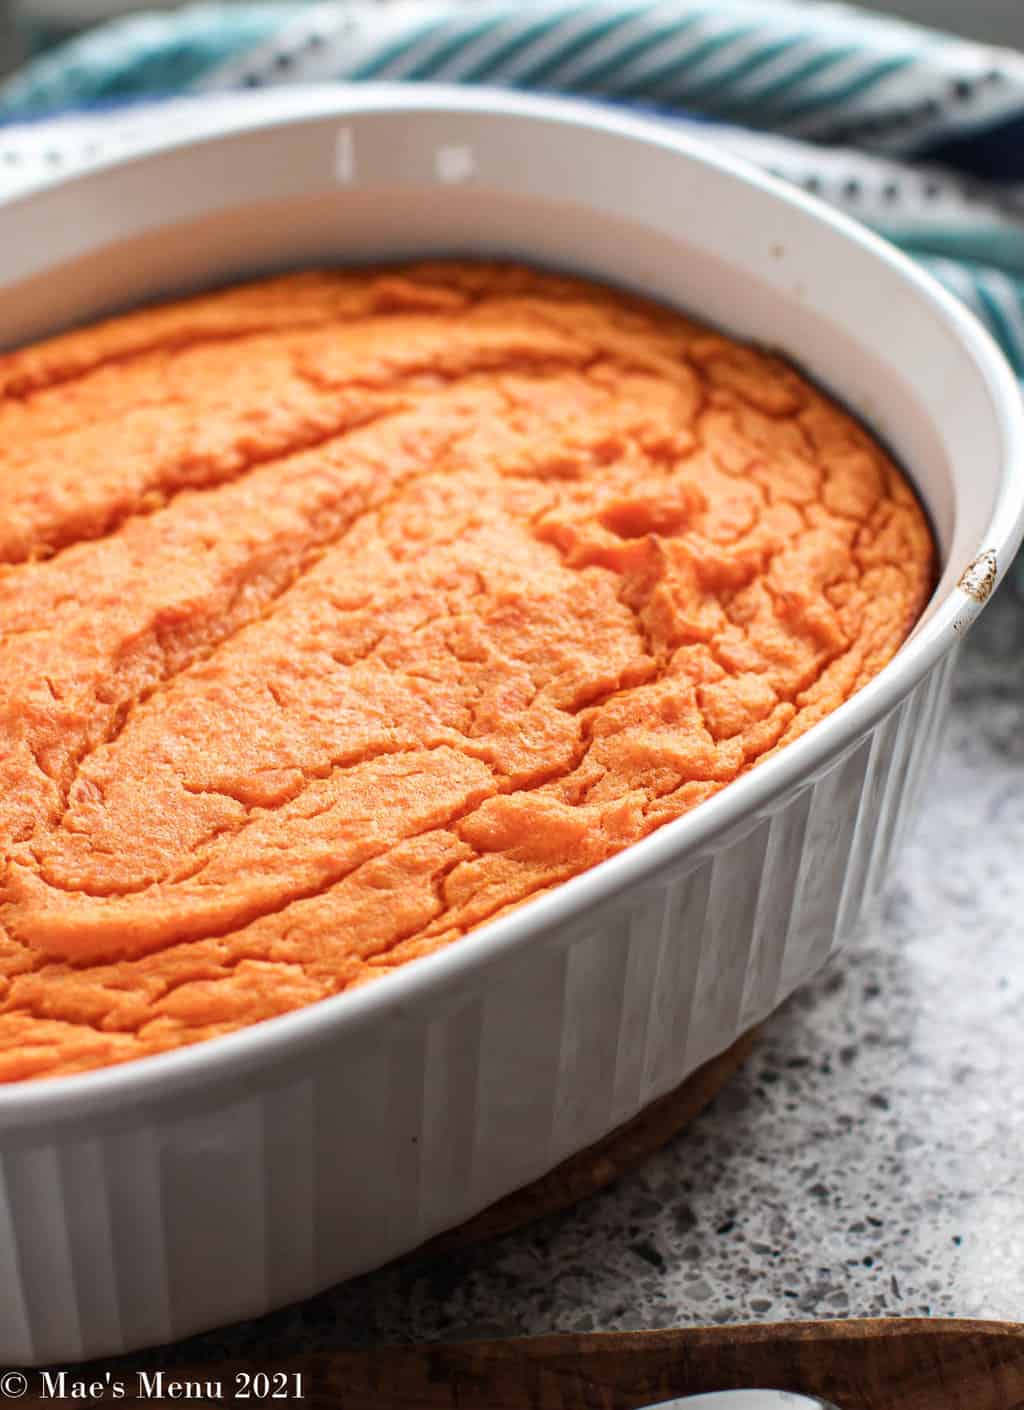 A side angle shot of a casserole dish full of sweet potato soufle on a granite counter